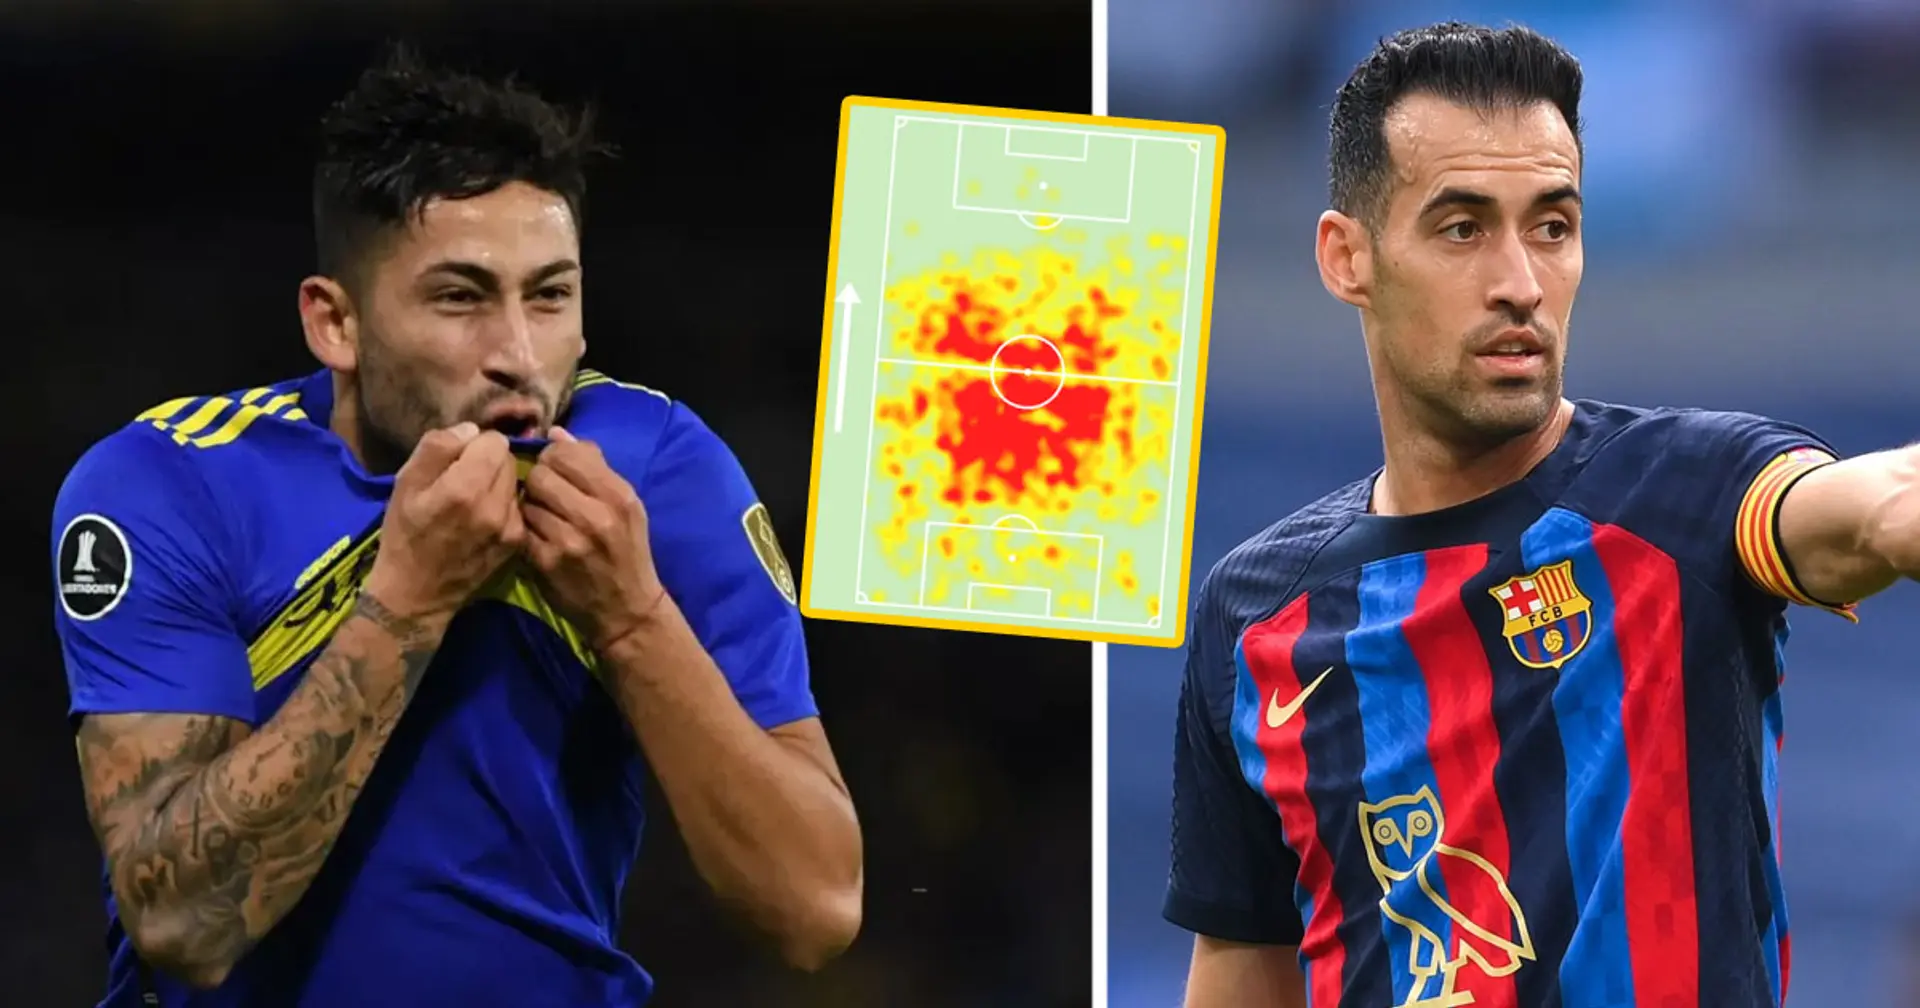 Barca identify Argentine talent as possible Busquets successor - he has ties with Barca